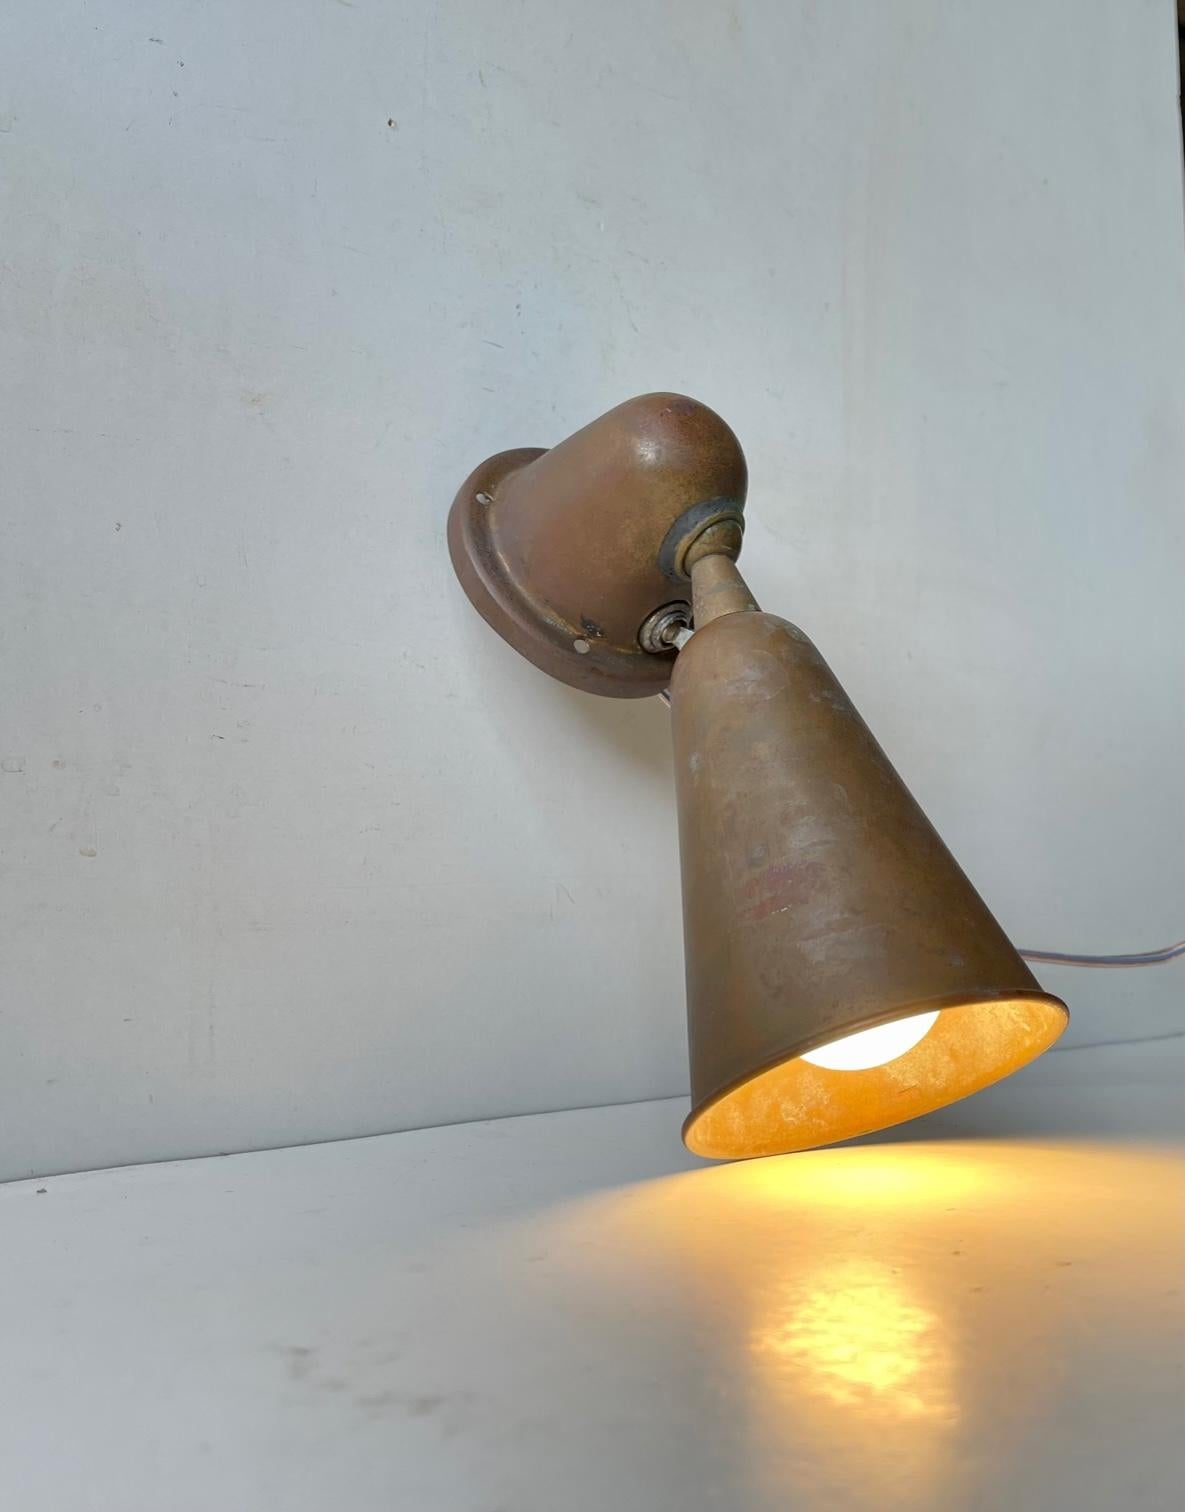 Nautical Bauhaus Era Wall Sconce in Patinated Copper, 1930s For Sale 1